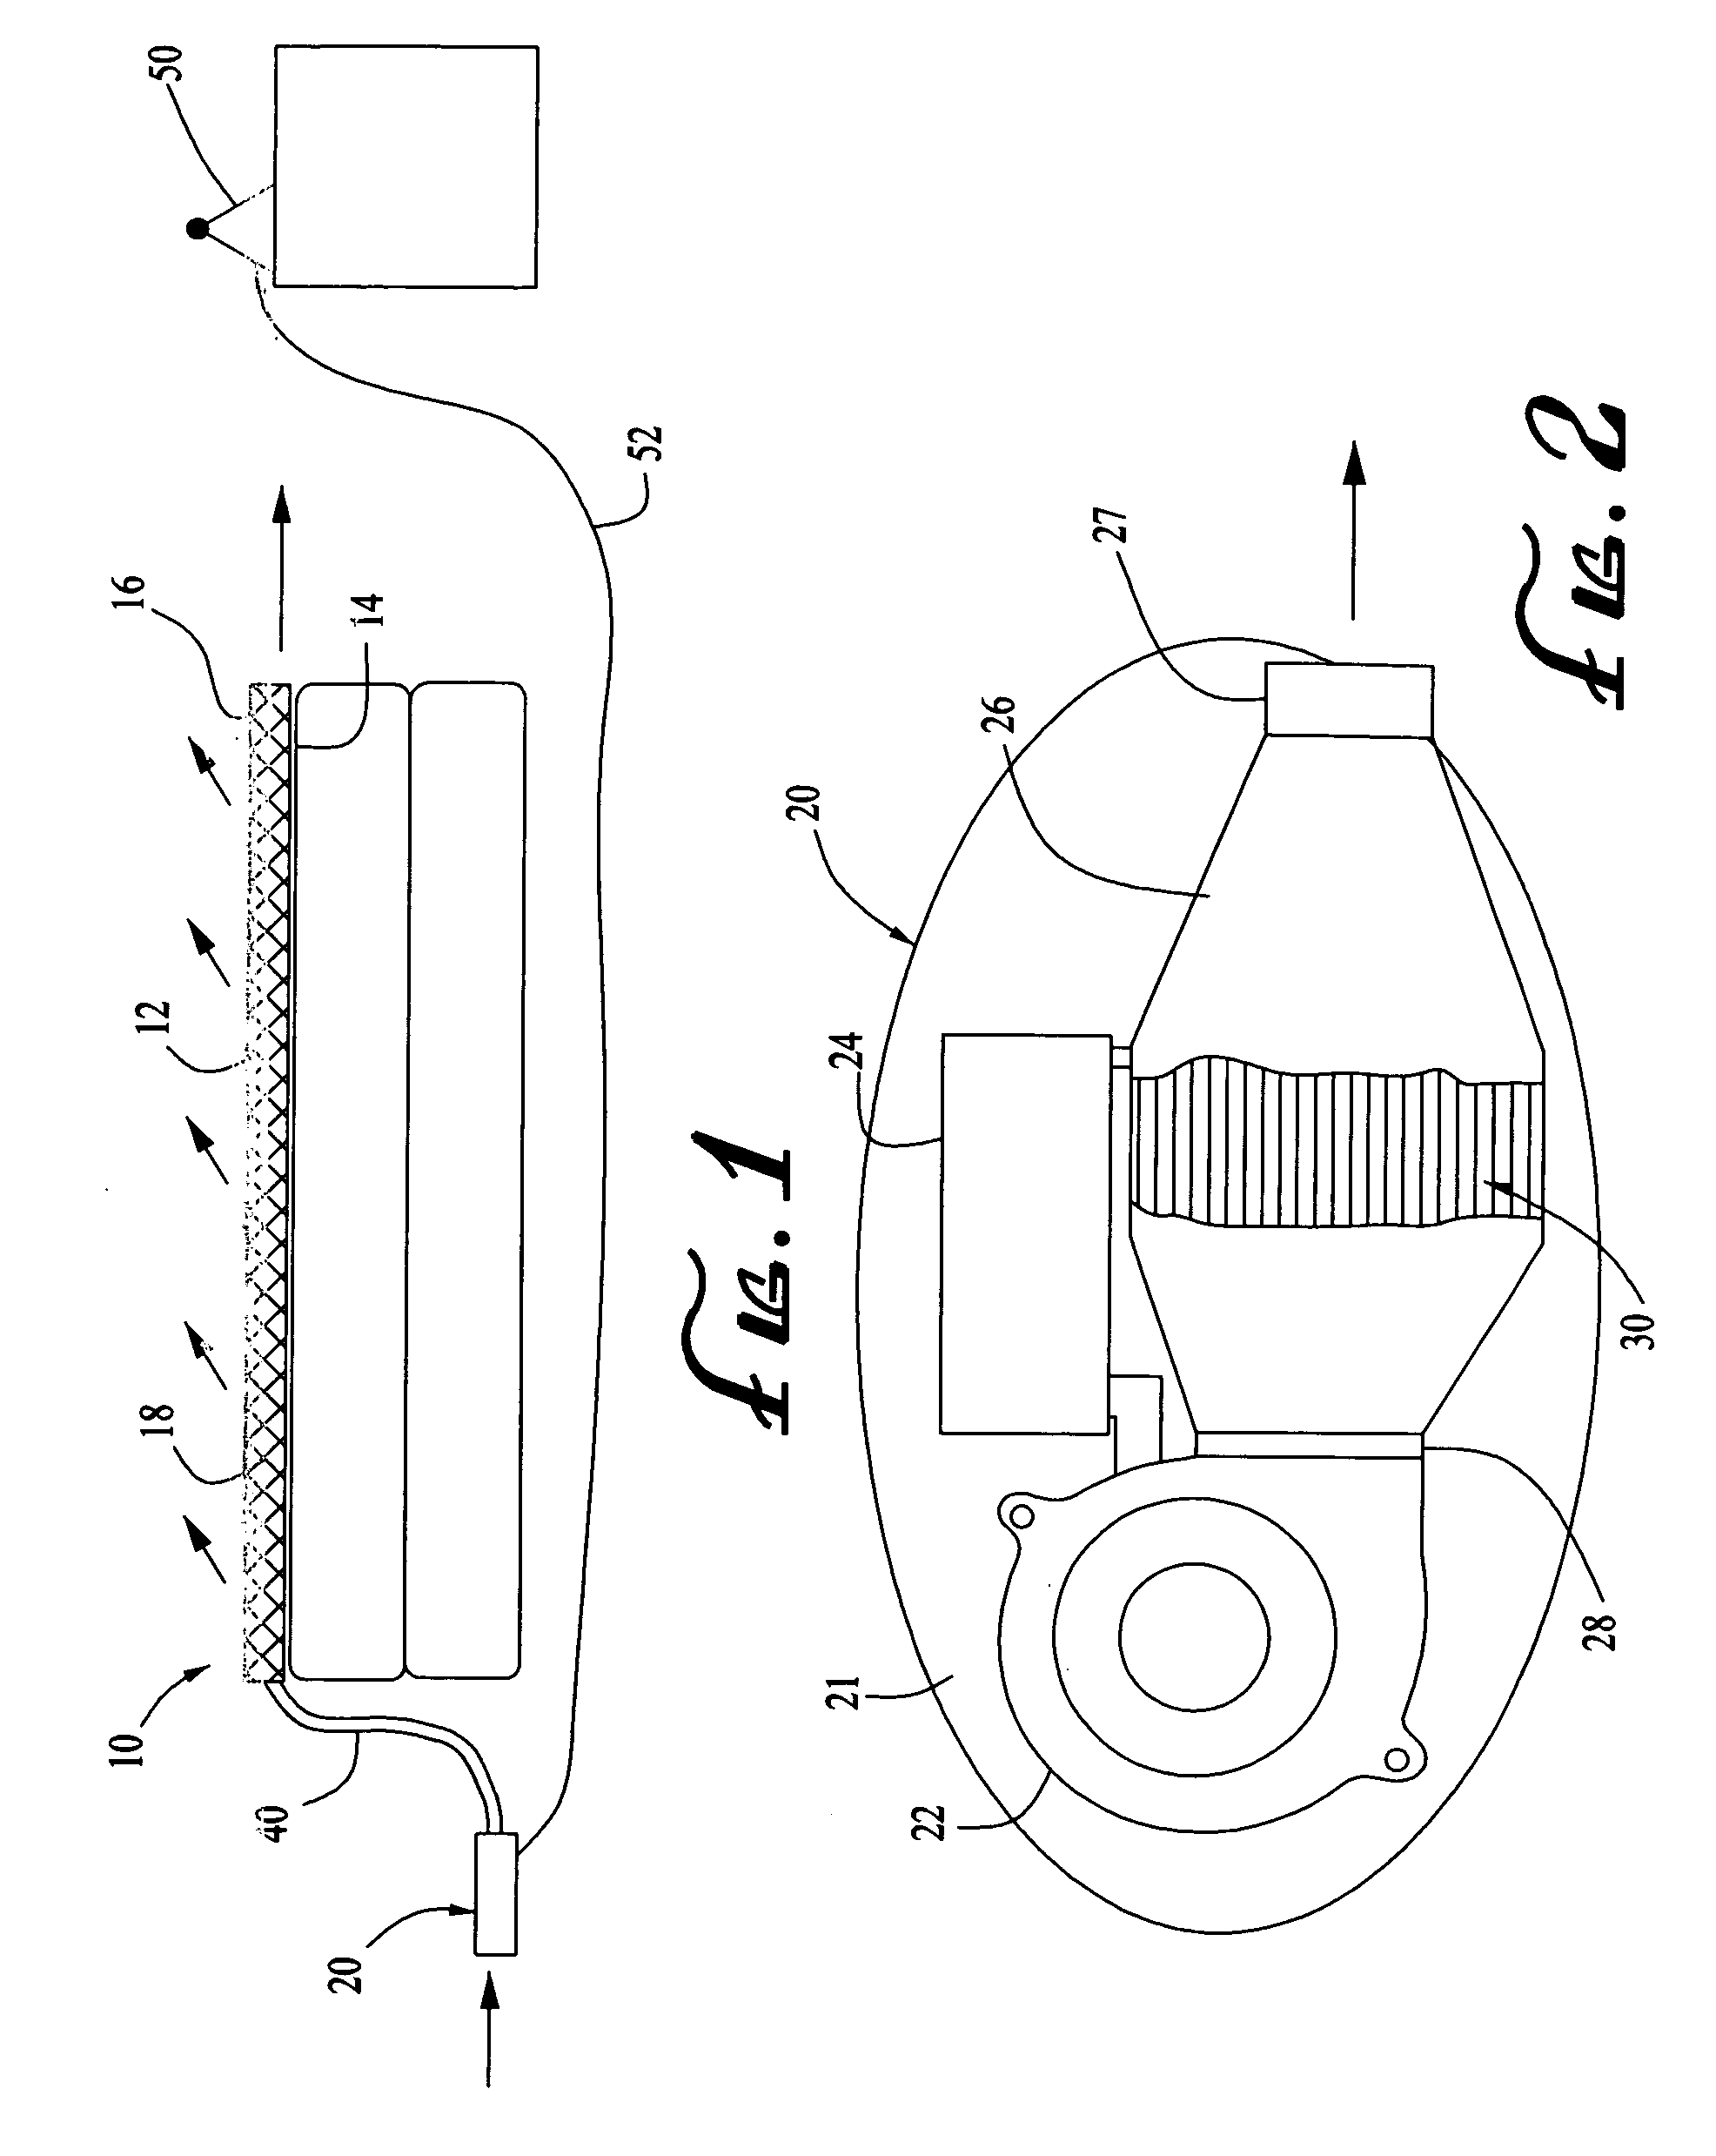 Convective cushion with positive coefficient of resistance heating mode